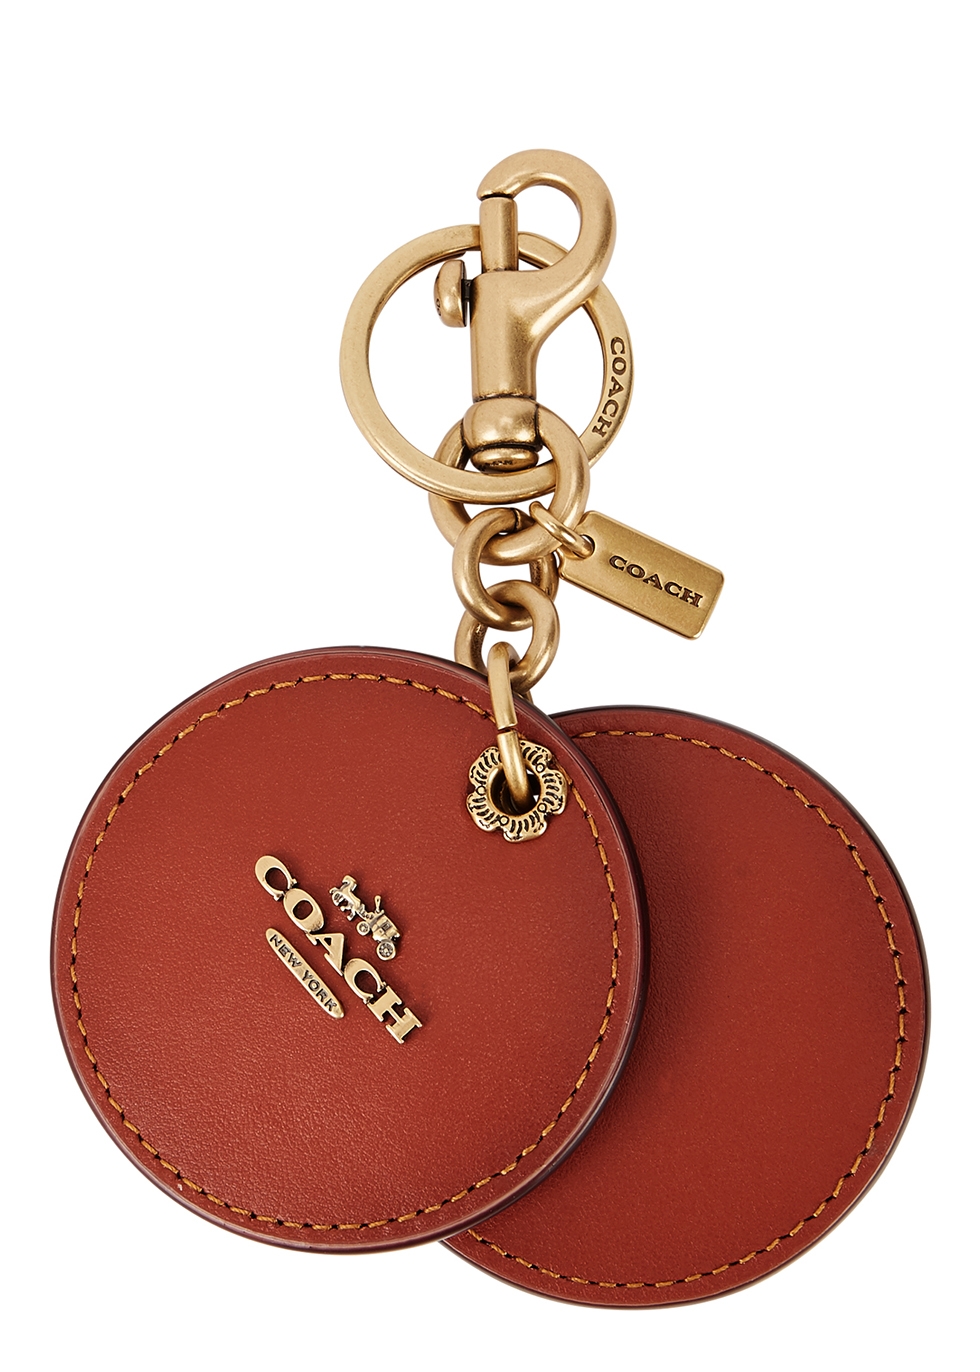 Brown leather mirror bag charm